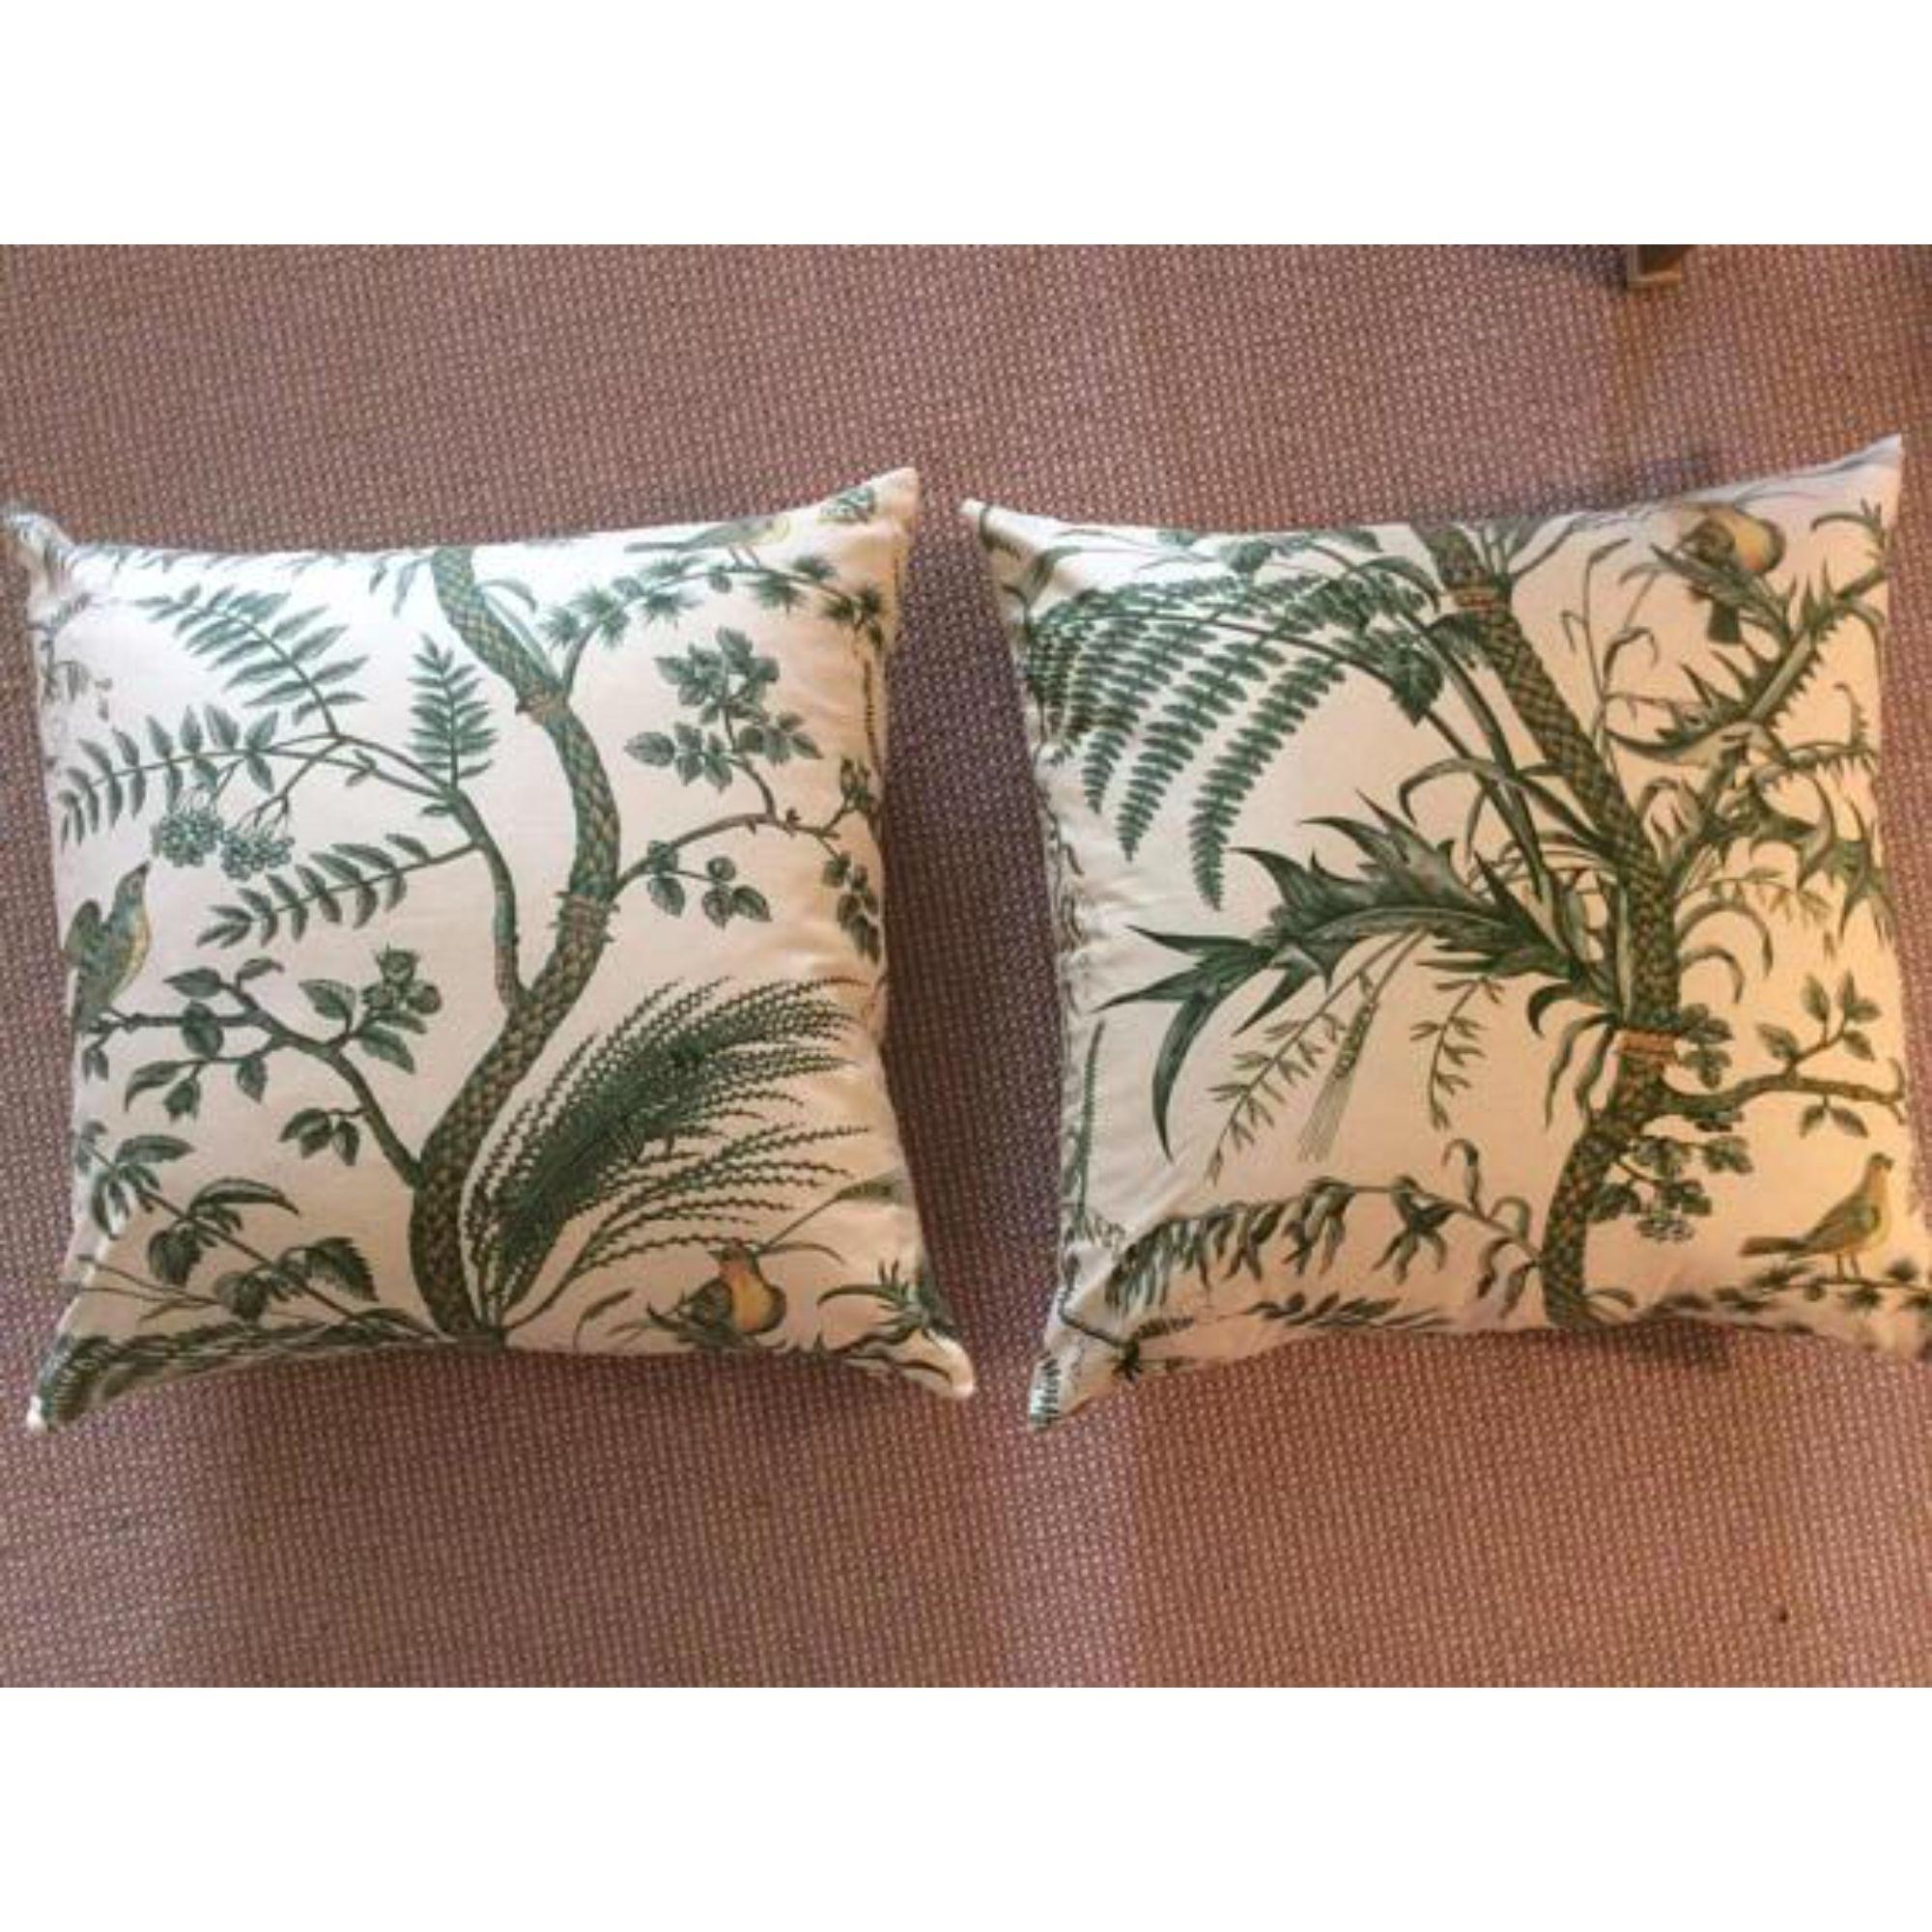 **Pillows come with Down Inserts!**

A classic from Brunschwig and Fils-Bird and Thistle is one of those designs that stands the test of time. In gorgeous deep green on ivory, the scene features vines and birds in a classically English botanical